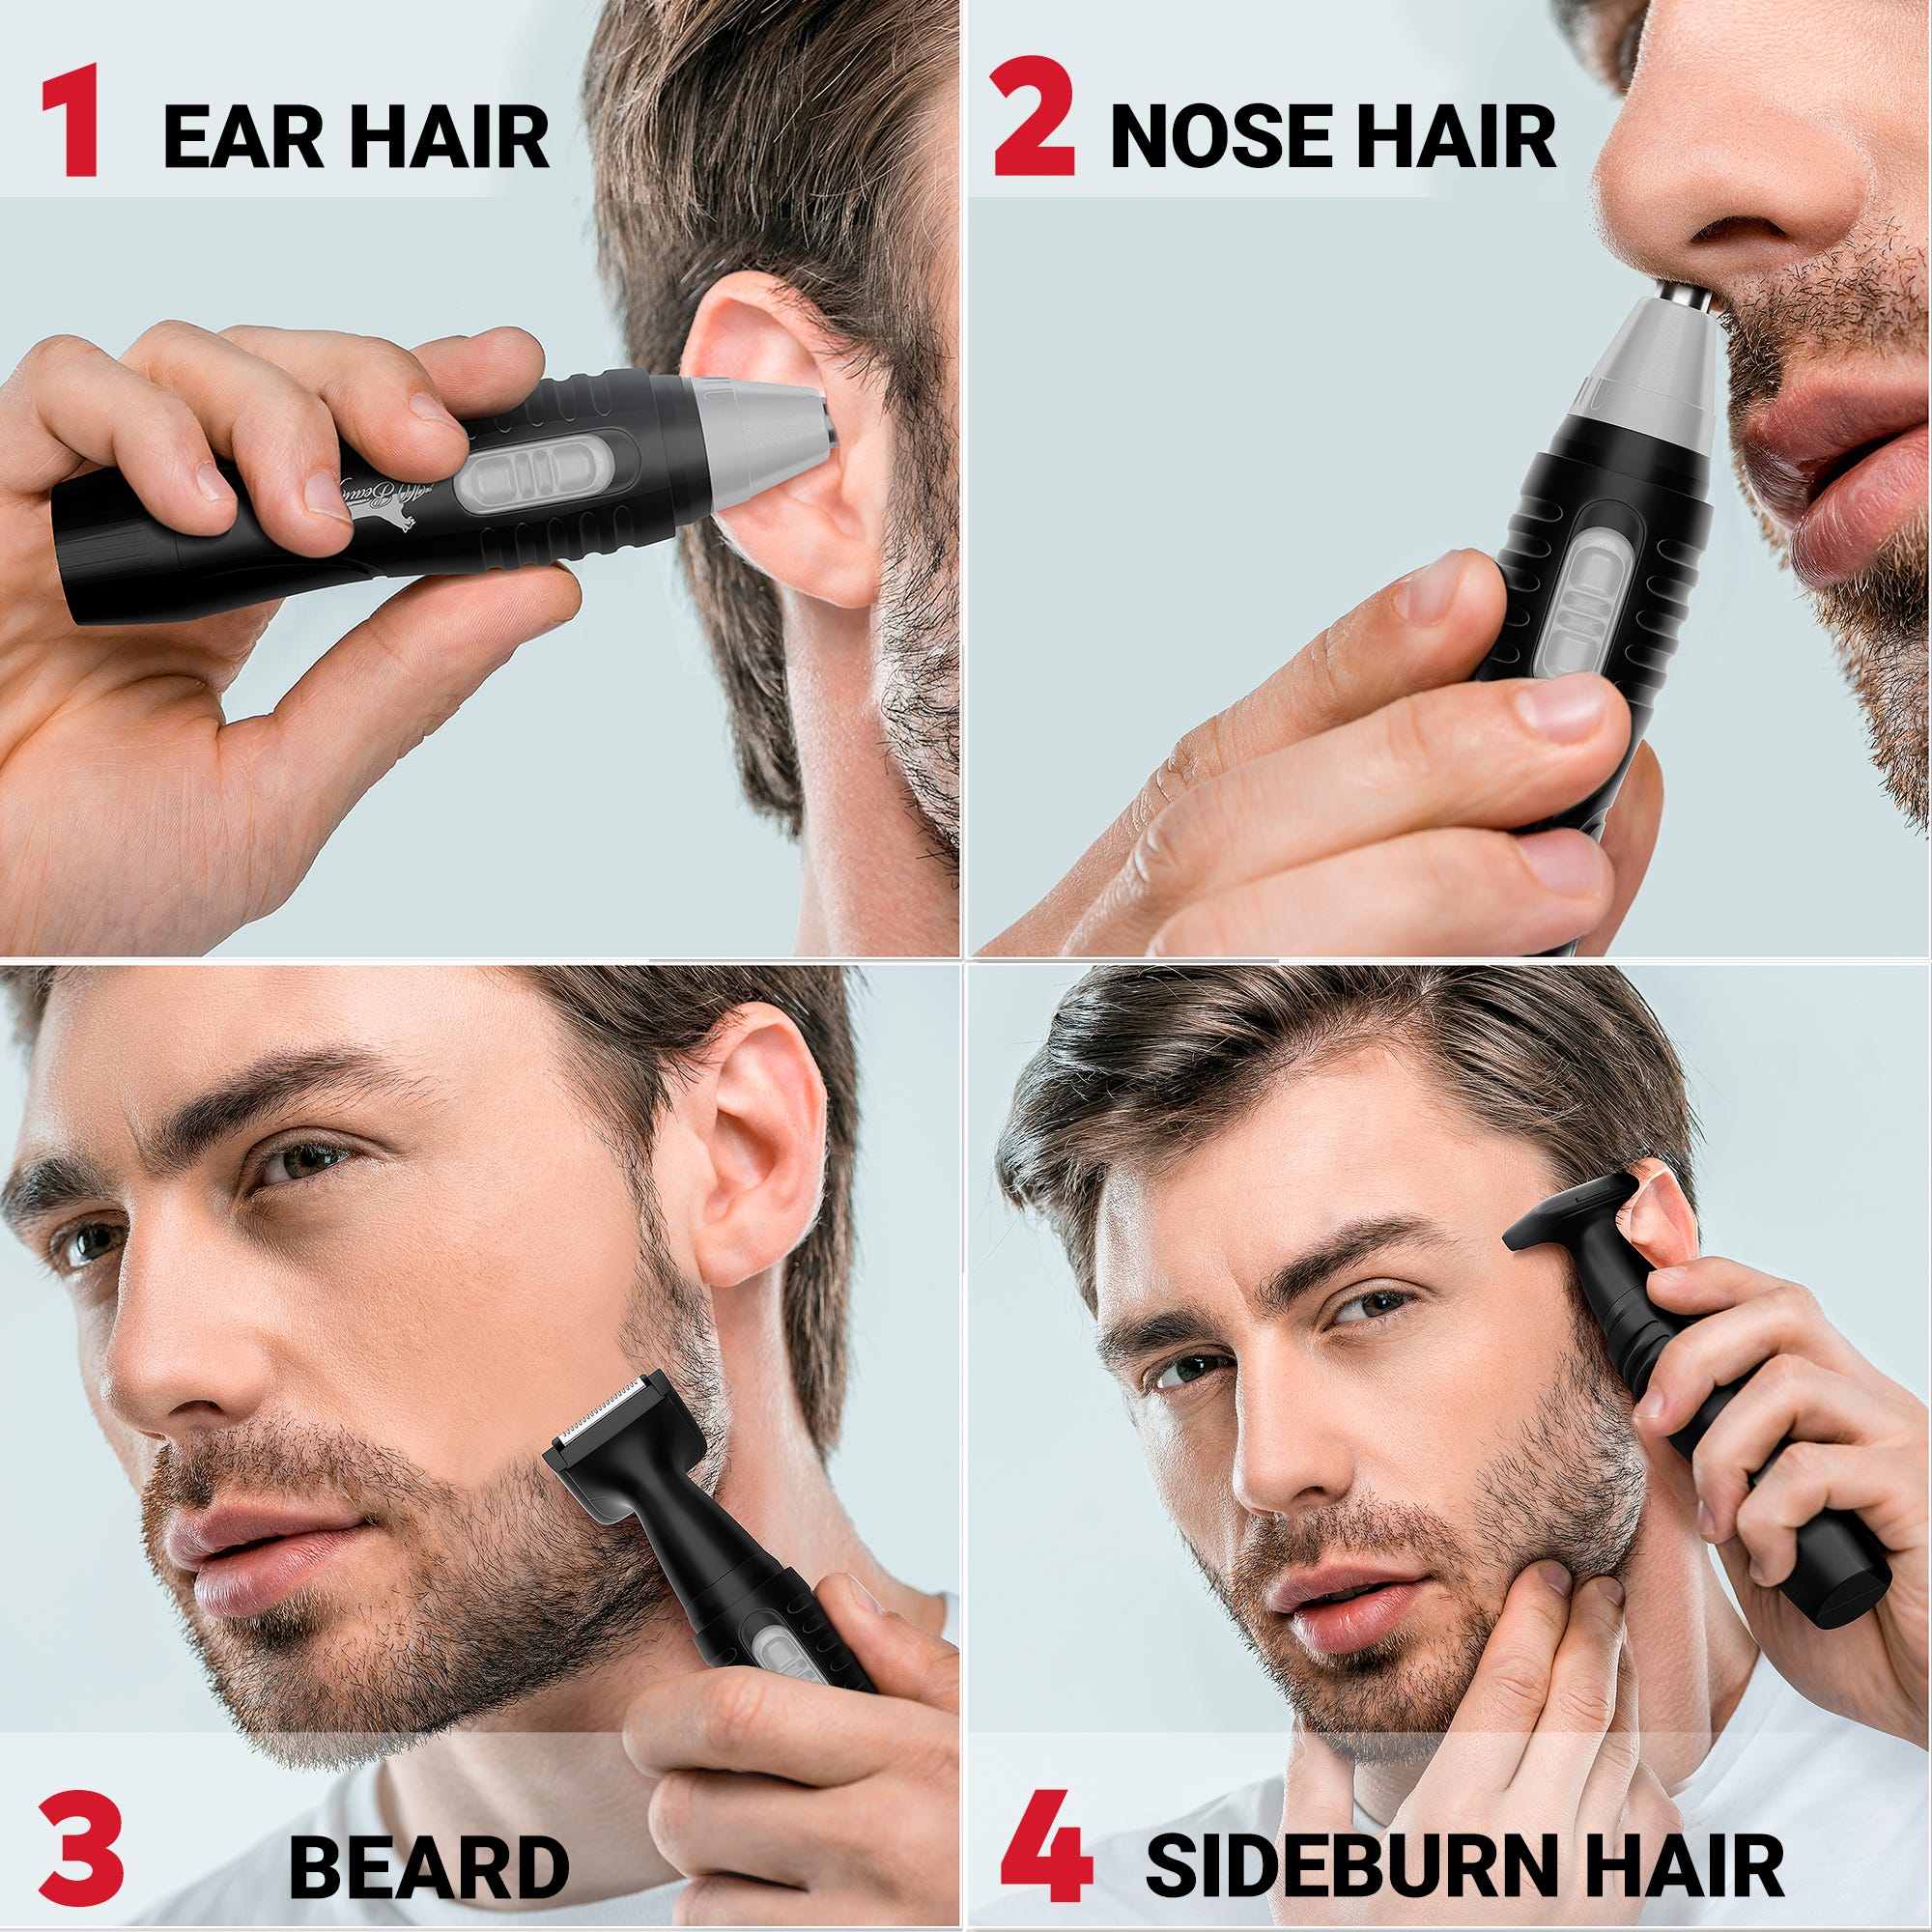 best way to get rid of nose hair